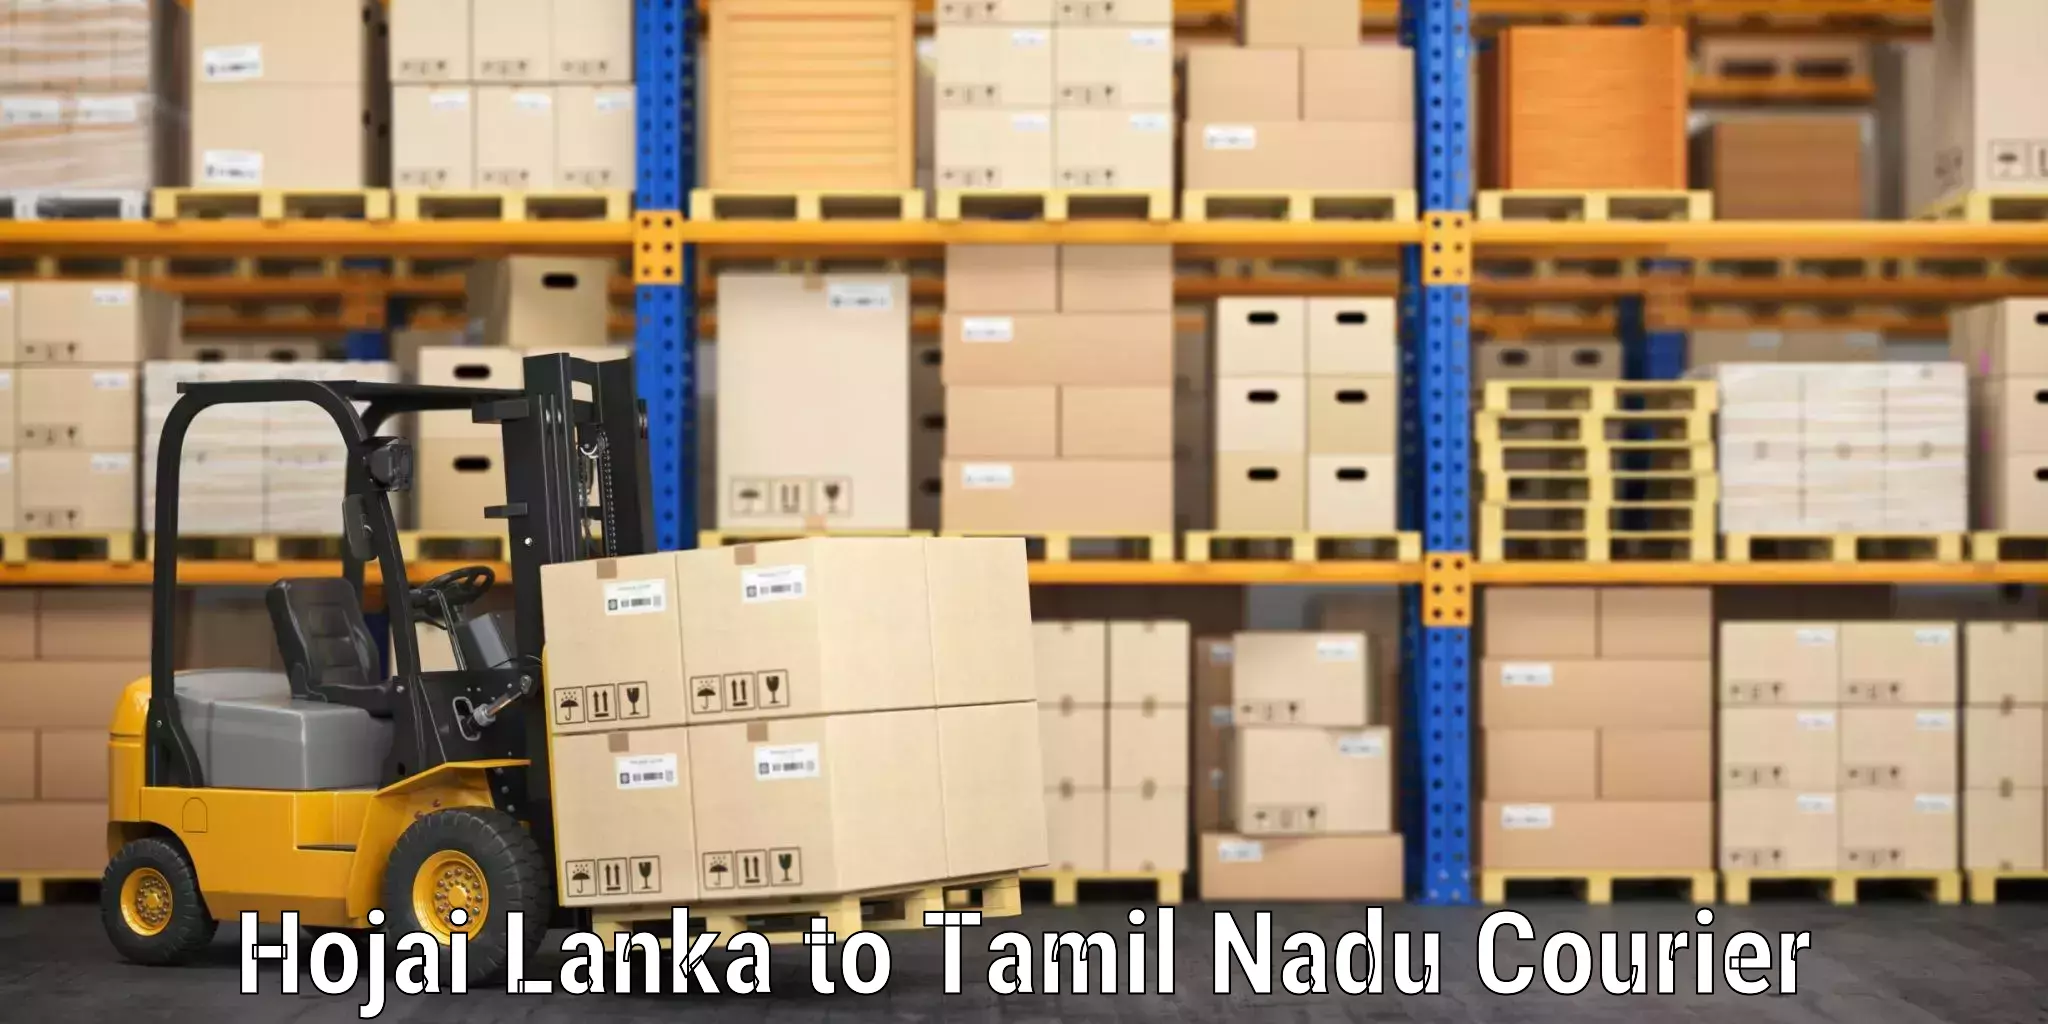 Online luggage shipping booking Hojai Lanka to Tamil Nadu Agricultural University Coimbatore